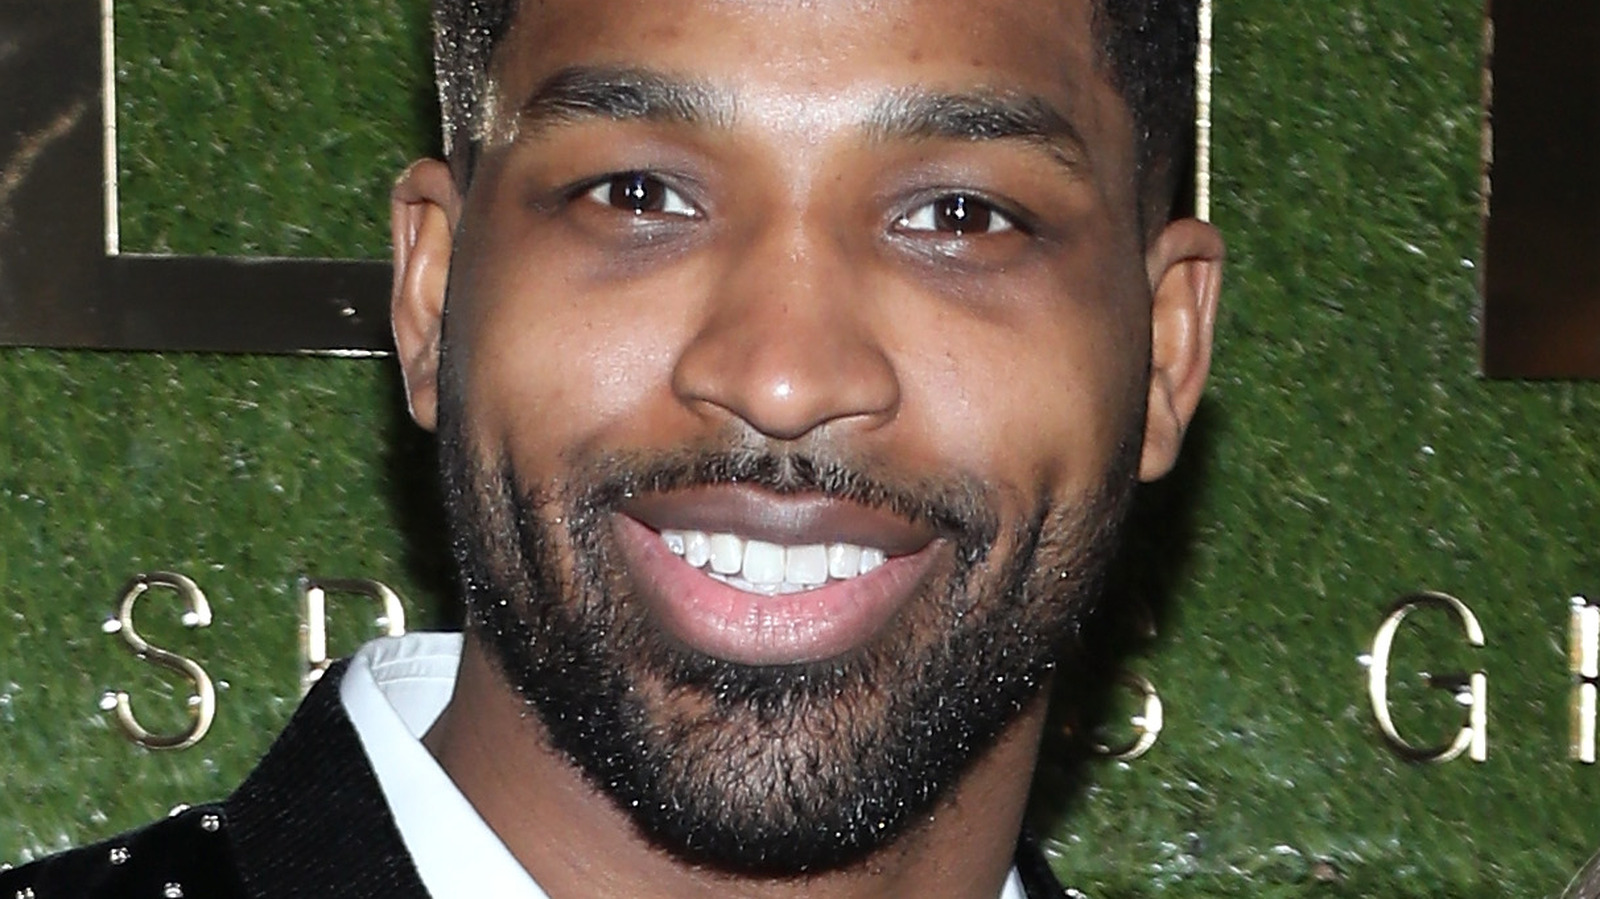 Who Has Tristan Thompson Been With Besides Khloe Kardashian?